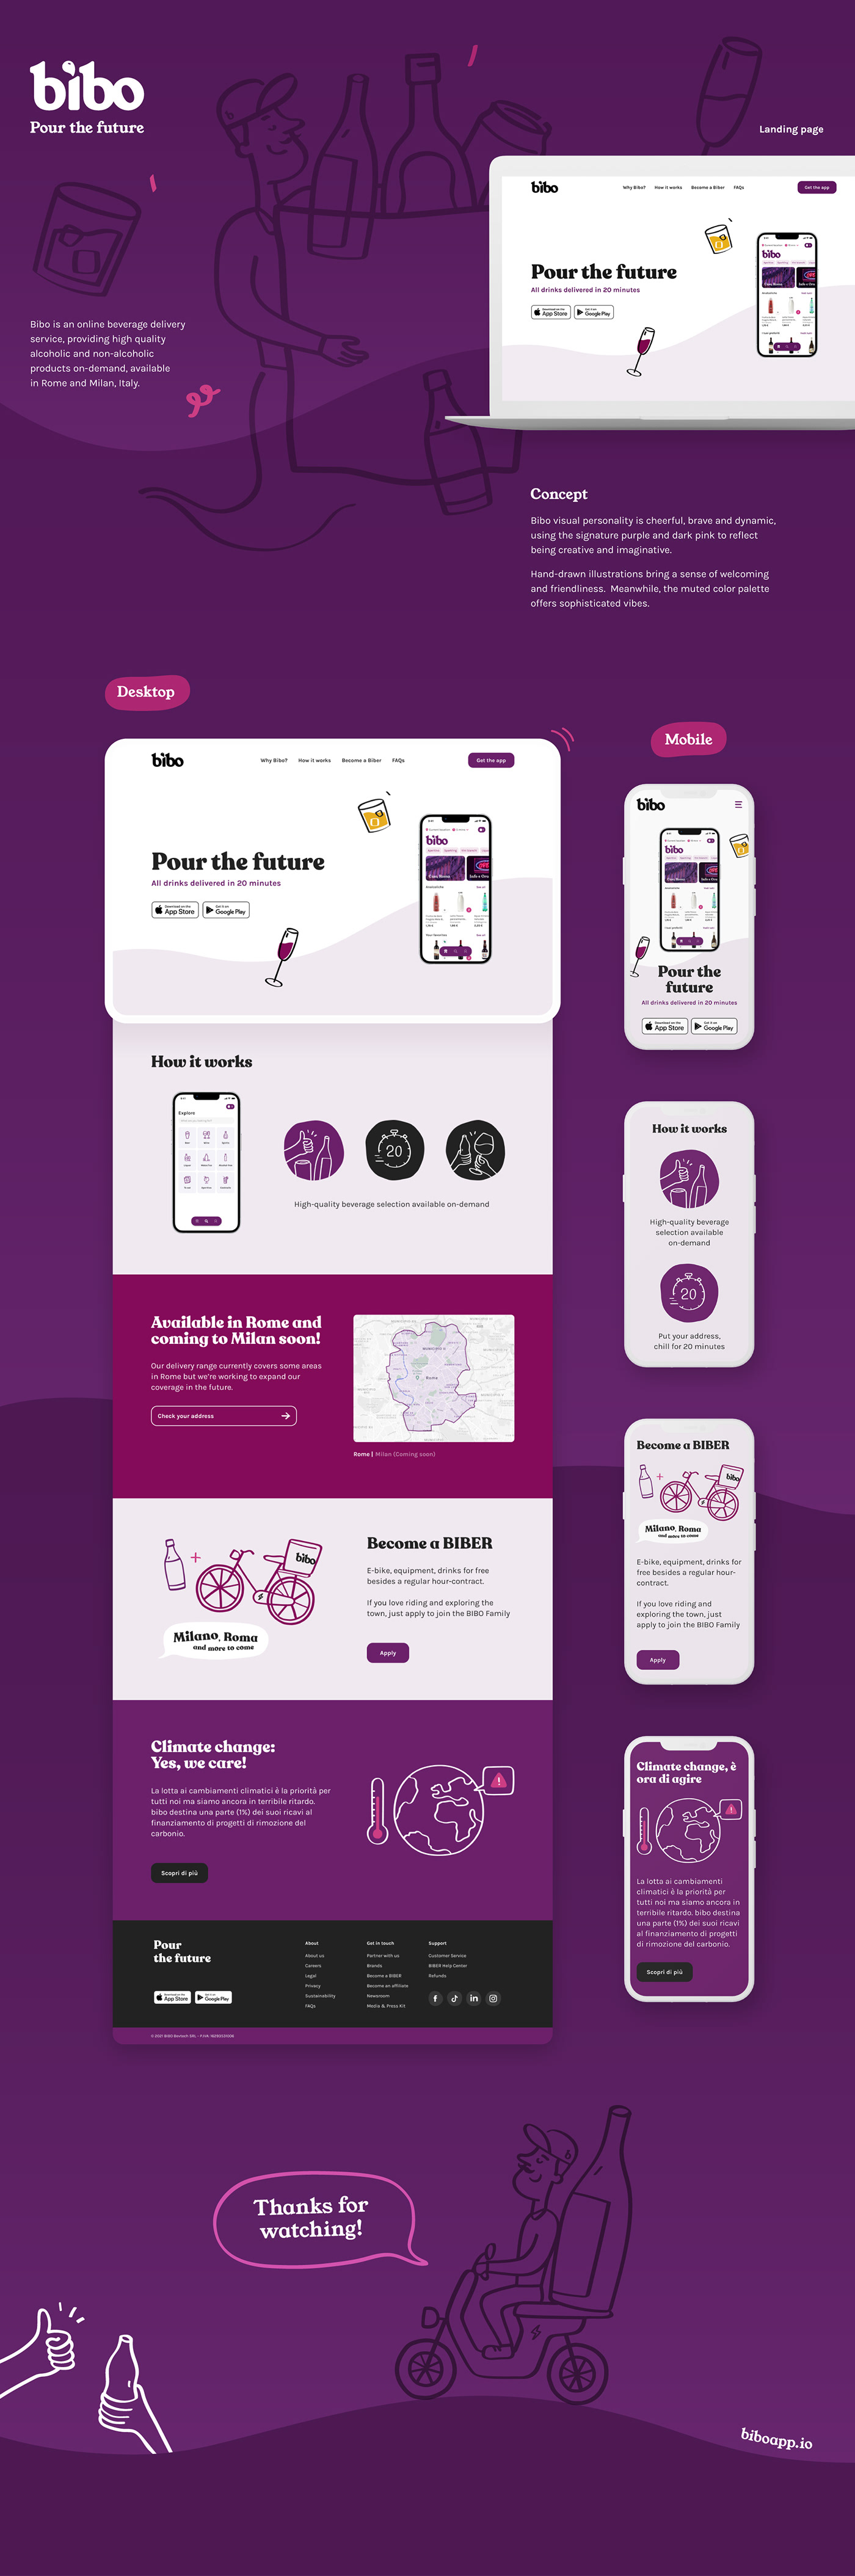 Company Branding delivery app delivery service Grocery Grocery App landing page Web Design  brand identity Visual Branding visual identity